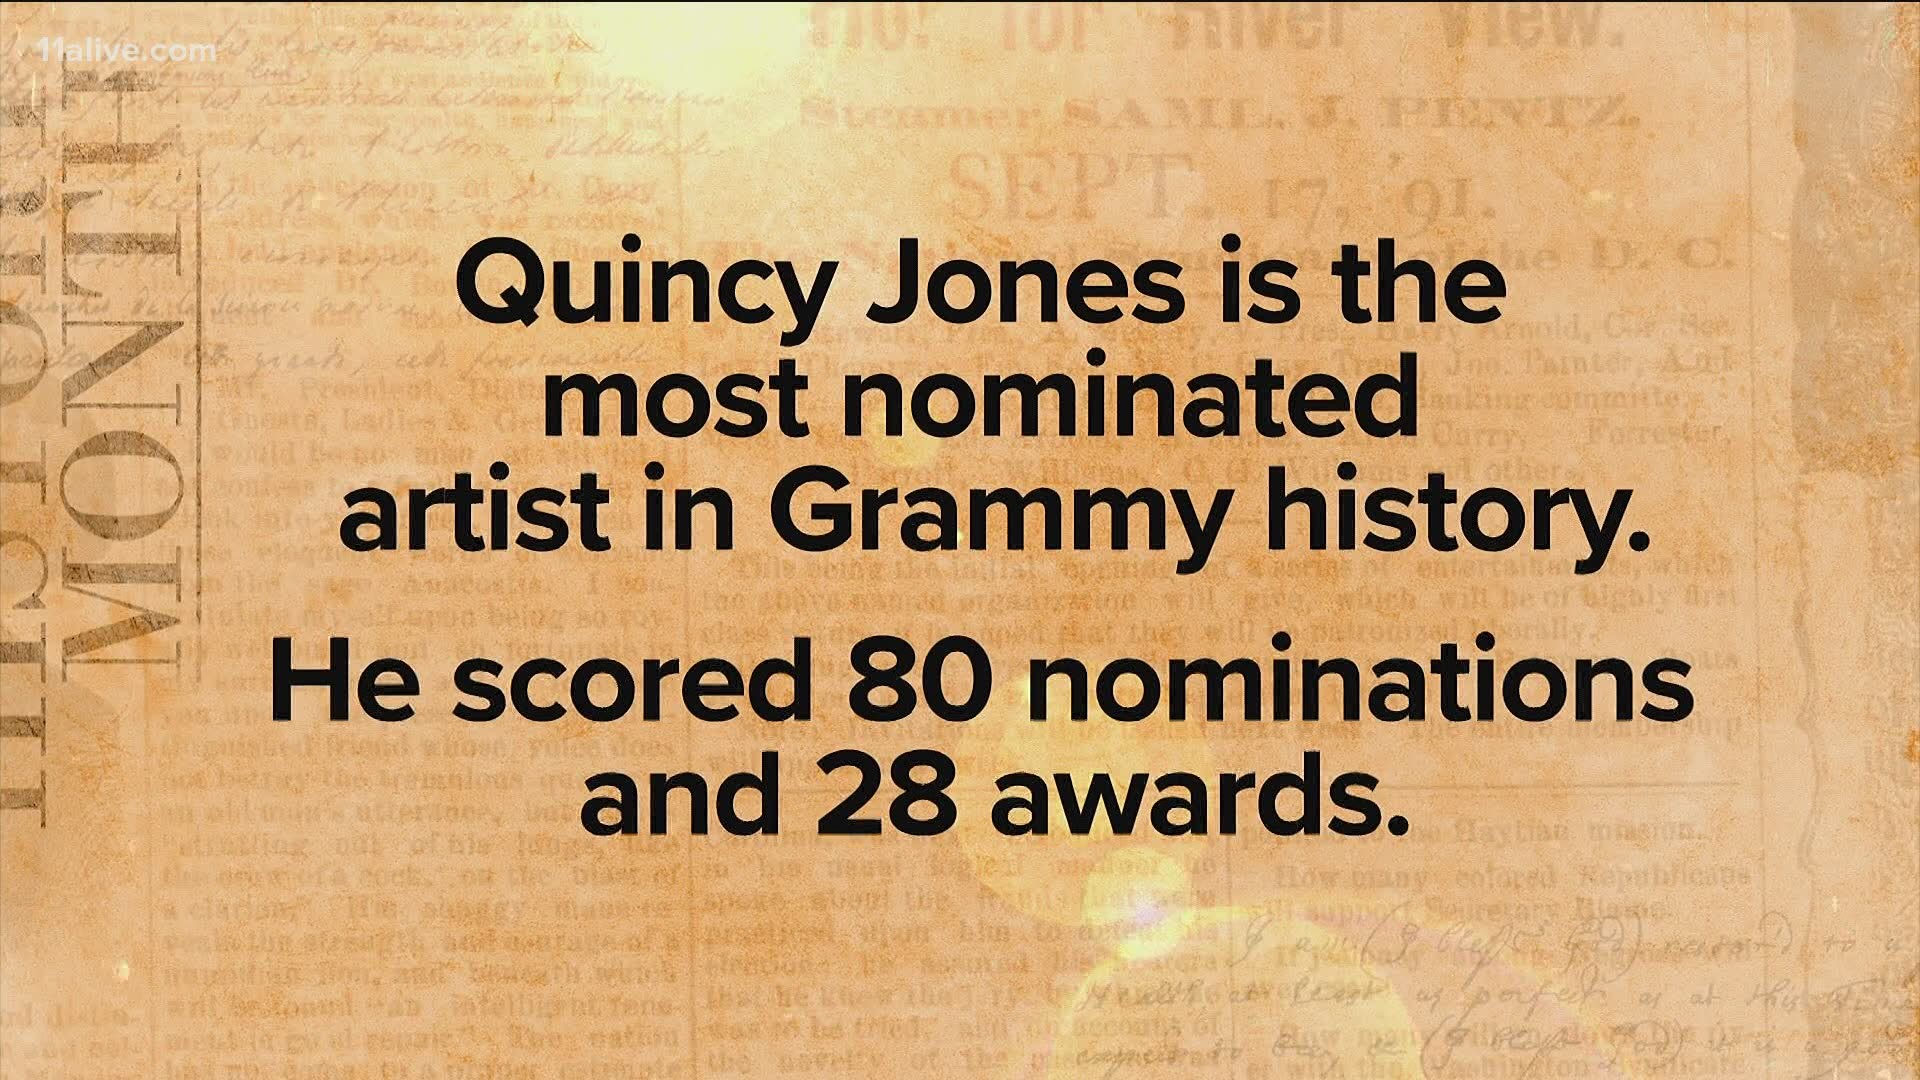 He is the most nominated artist in Grammy history.